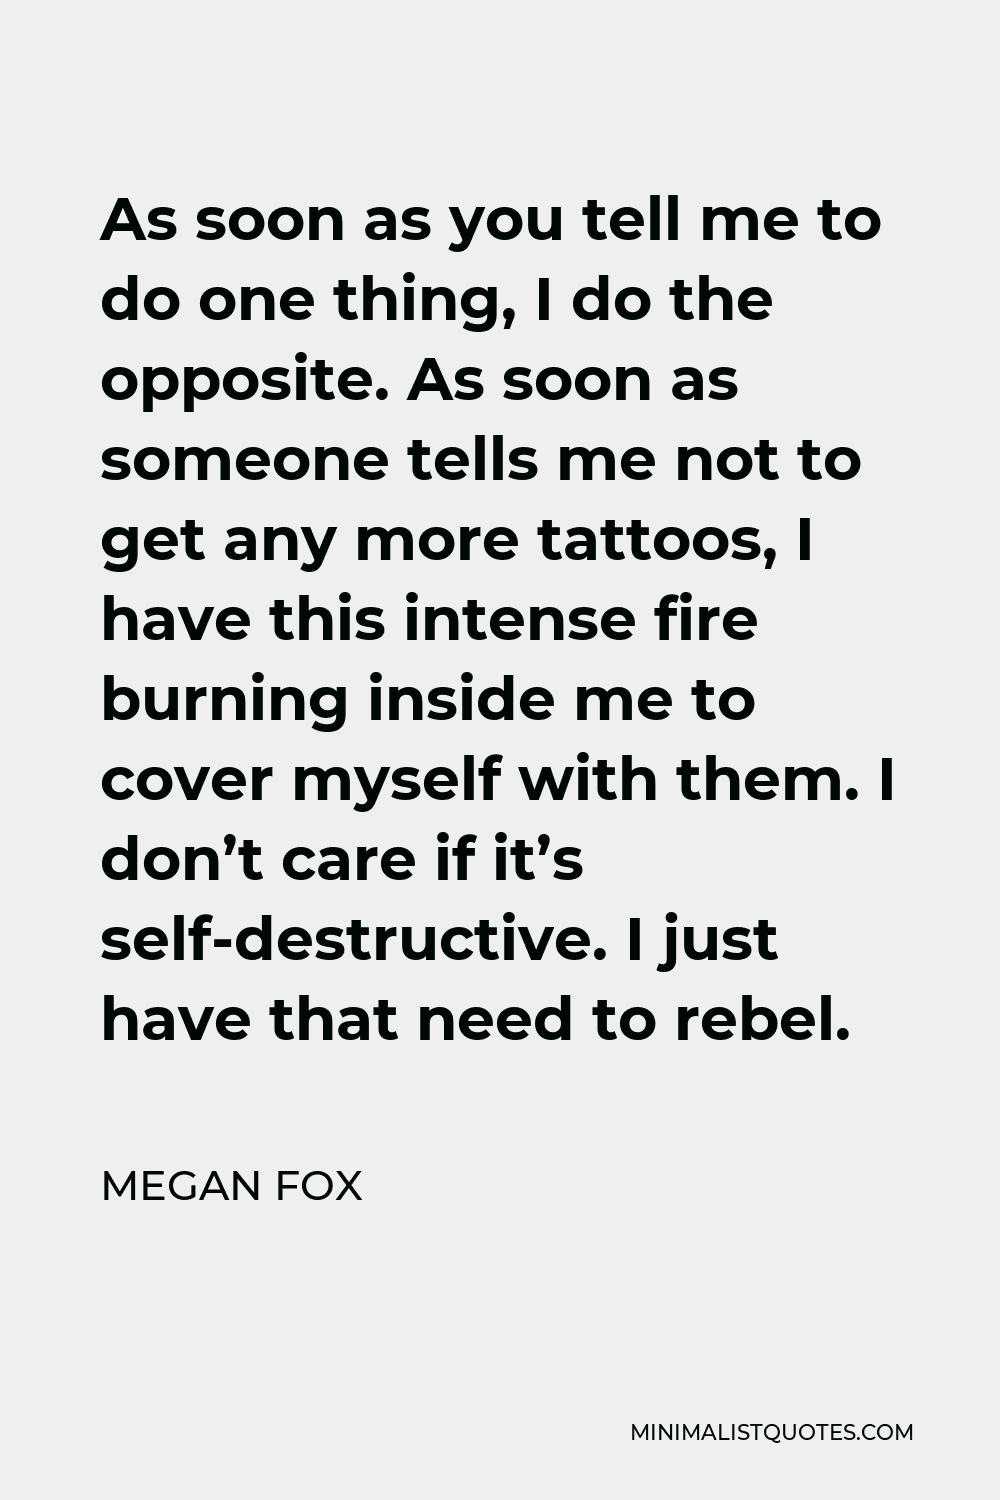 Megan Fox Quote - As soon as you tell me to do one thing, I do the opposite. As soon as someone tells me not to get any more tattoos, I have this intense fire burning inside me to cover myself with them. I don’t care if it’s self-destructive. I just have that need to rebel.